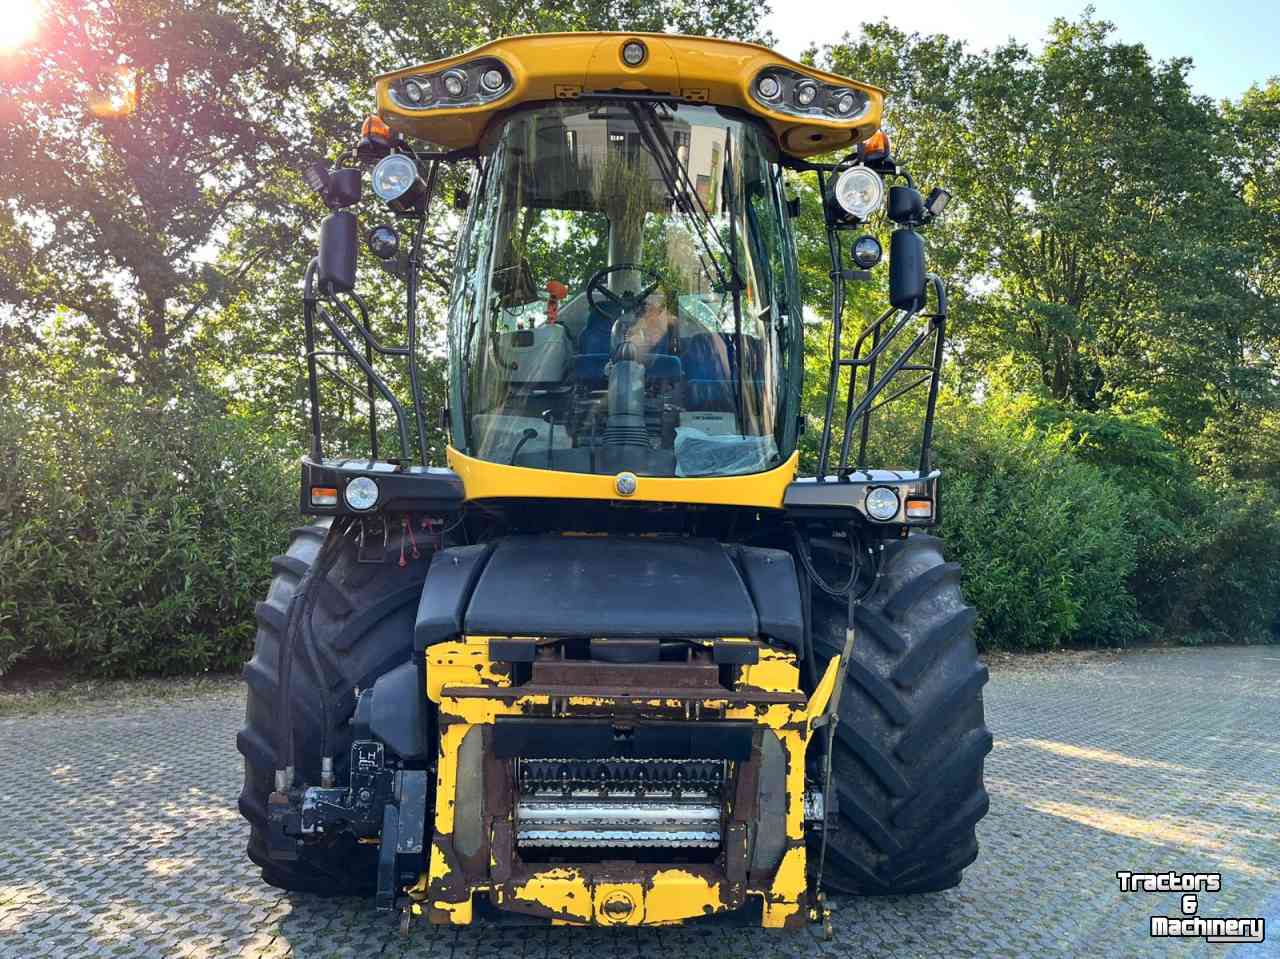 Ensileuse automotrice New Holland FR700